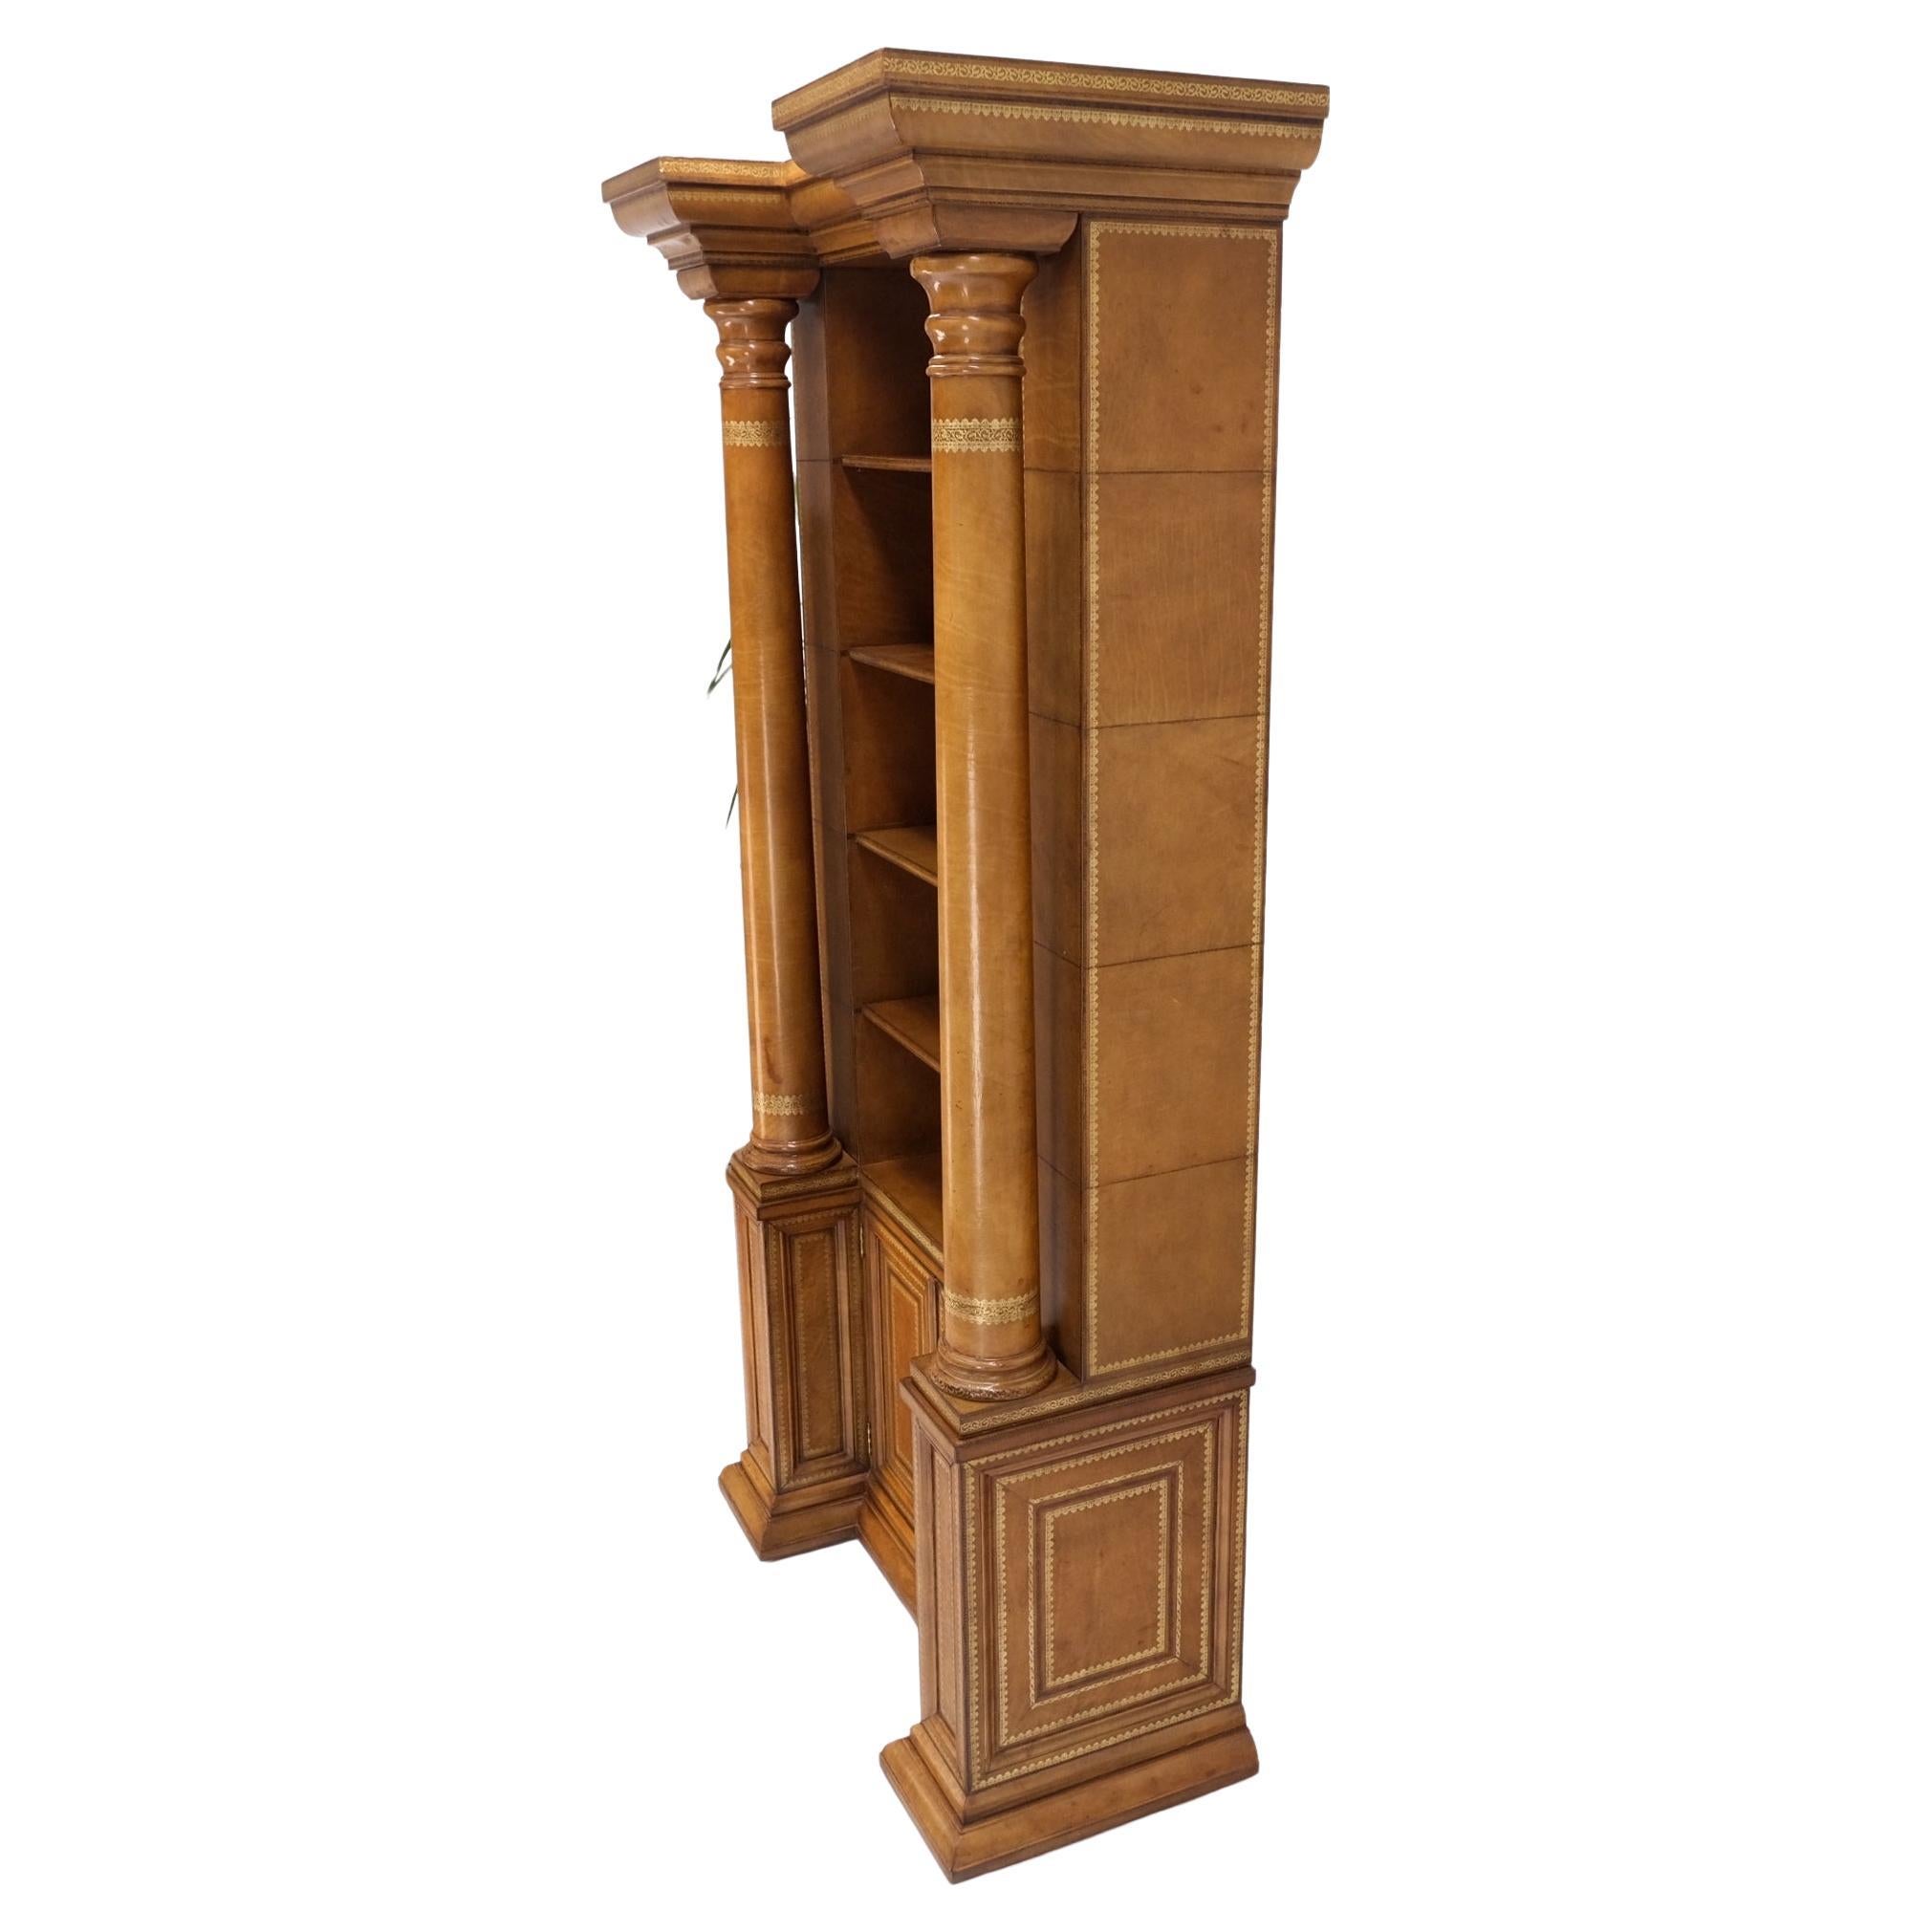 All Wrapped in Tooled Leather Massive Decorative Columns 2 Part Bookcase Hutch In Good Condition For Sale In Rockaway, NJ